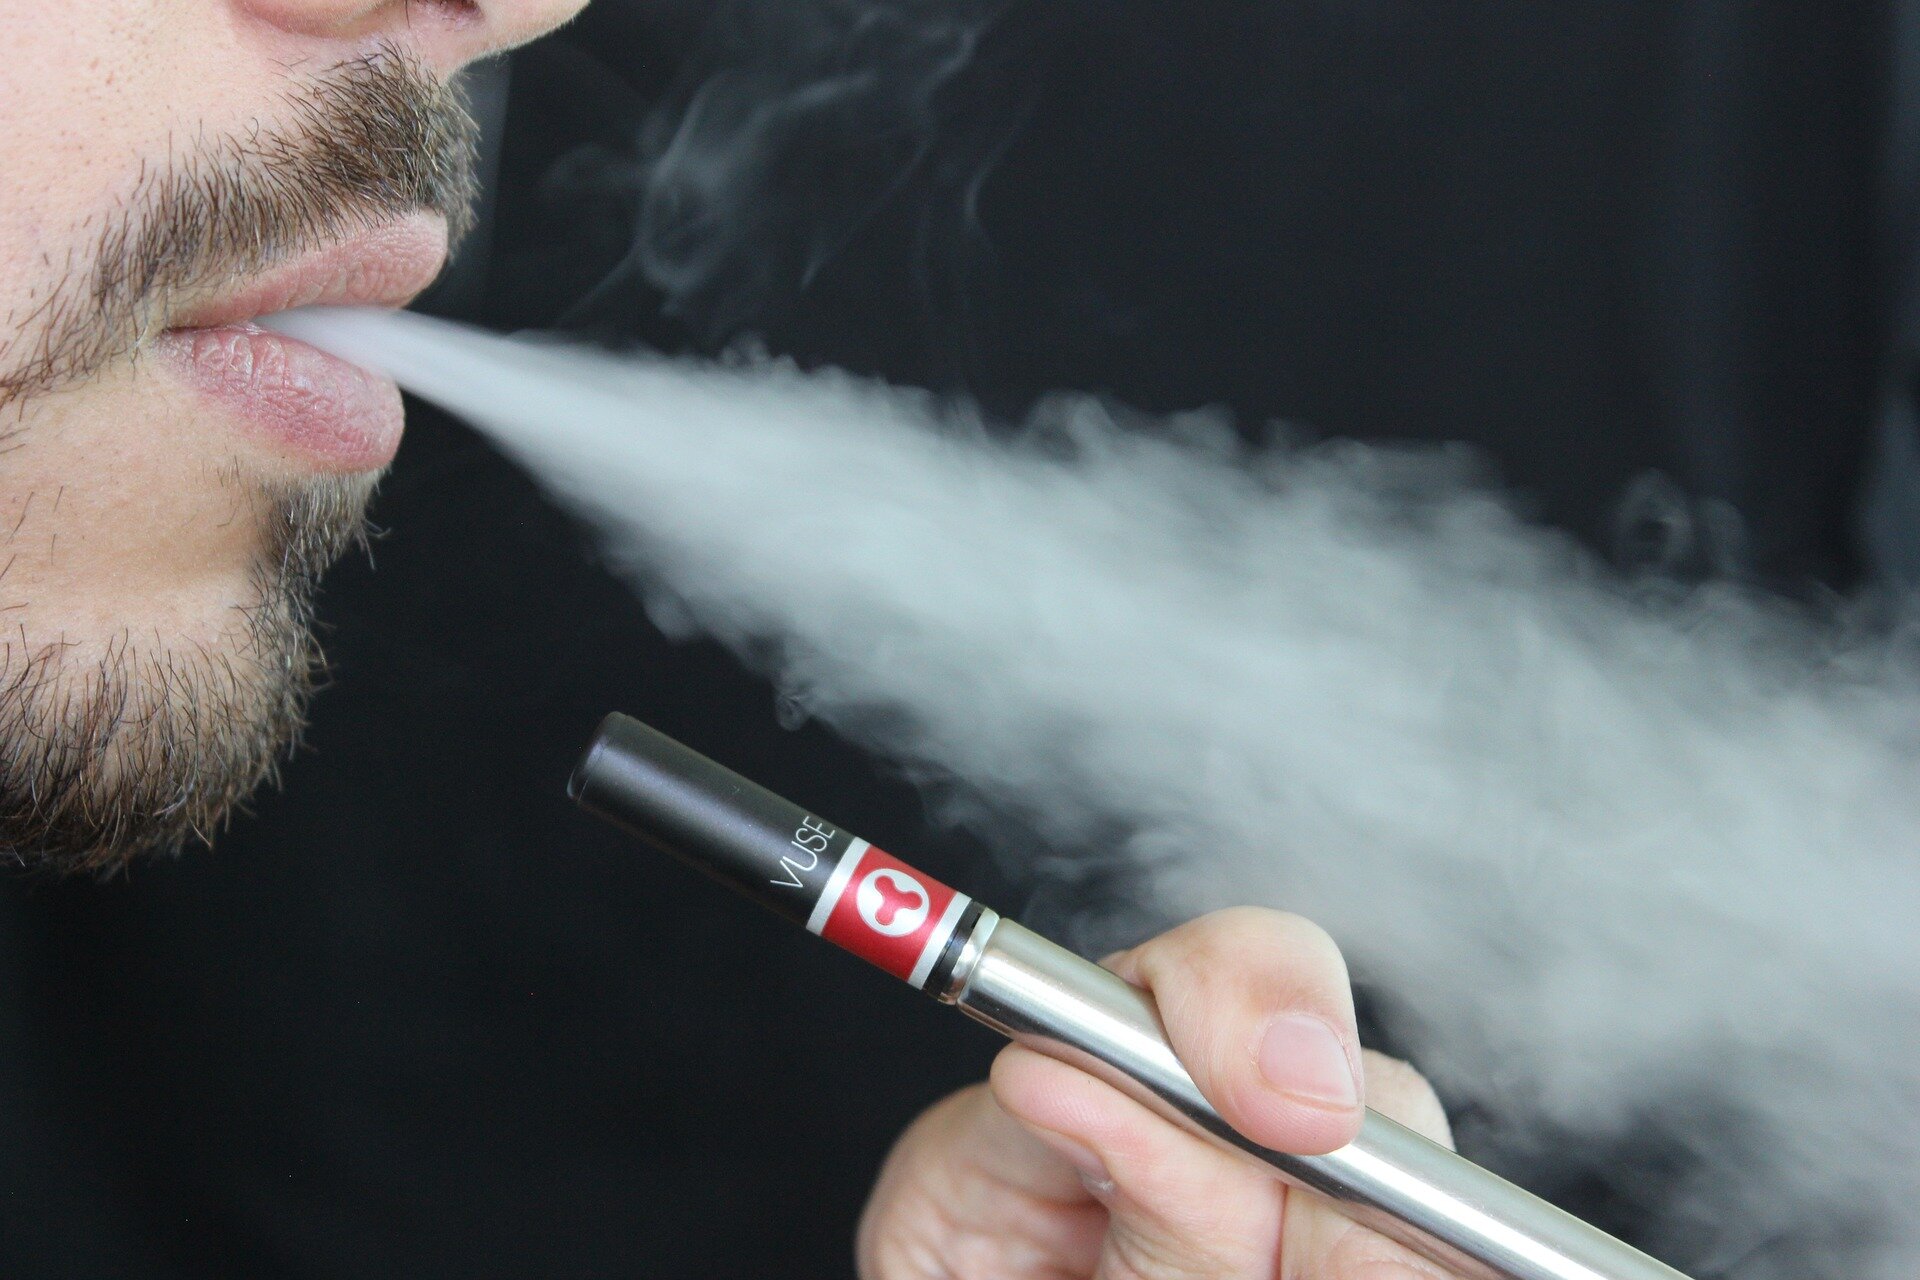 #Tobacco and e-cigs may put healthy young people at risk of severe COVID illness, new research suggests